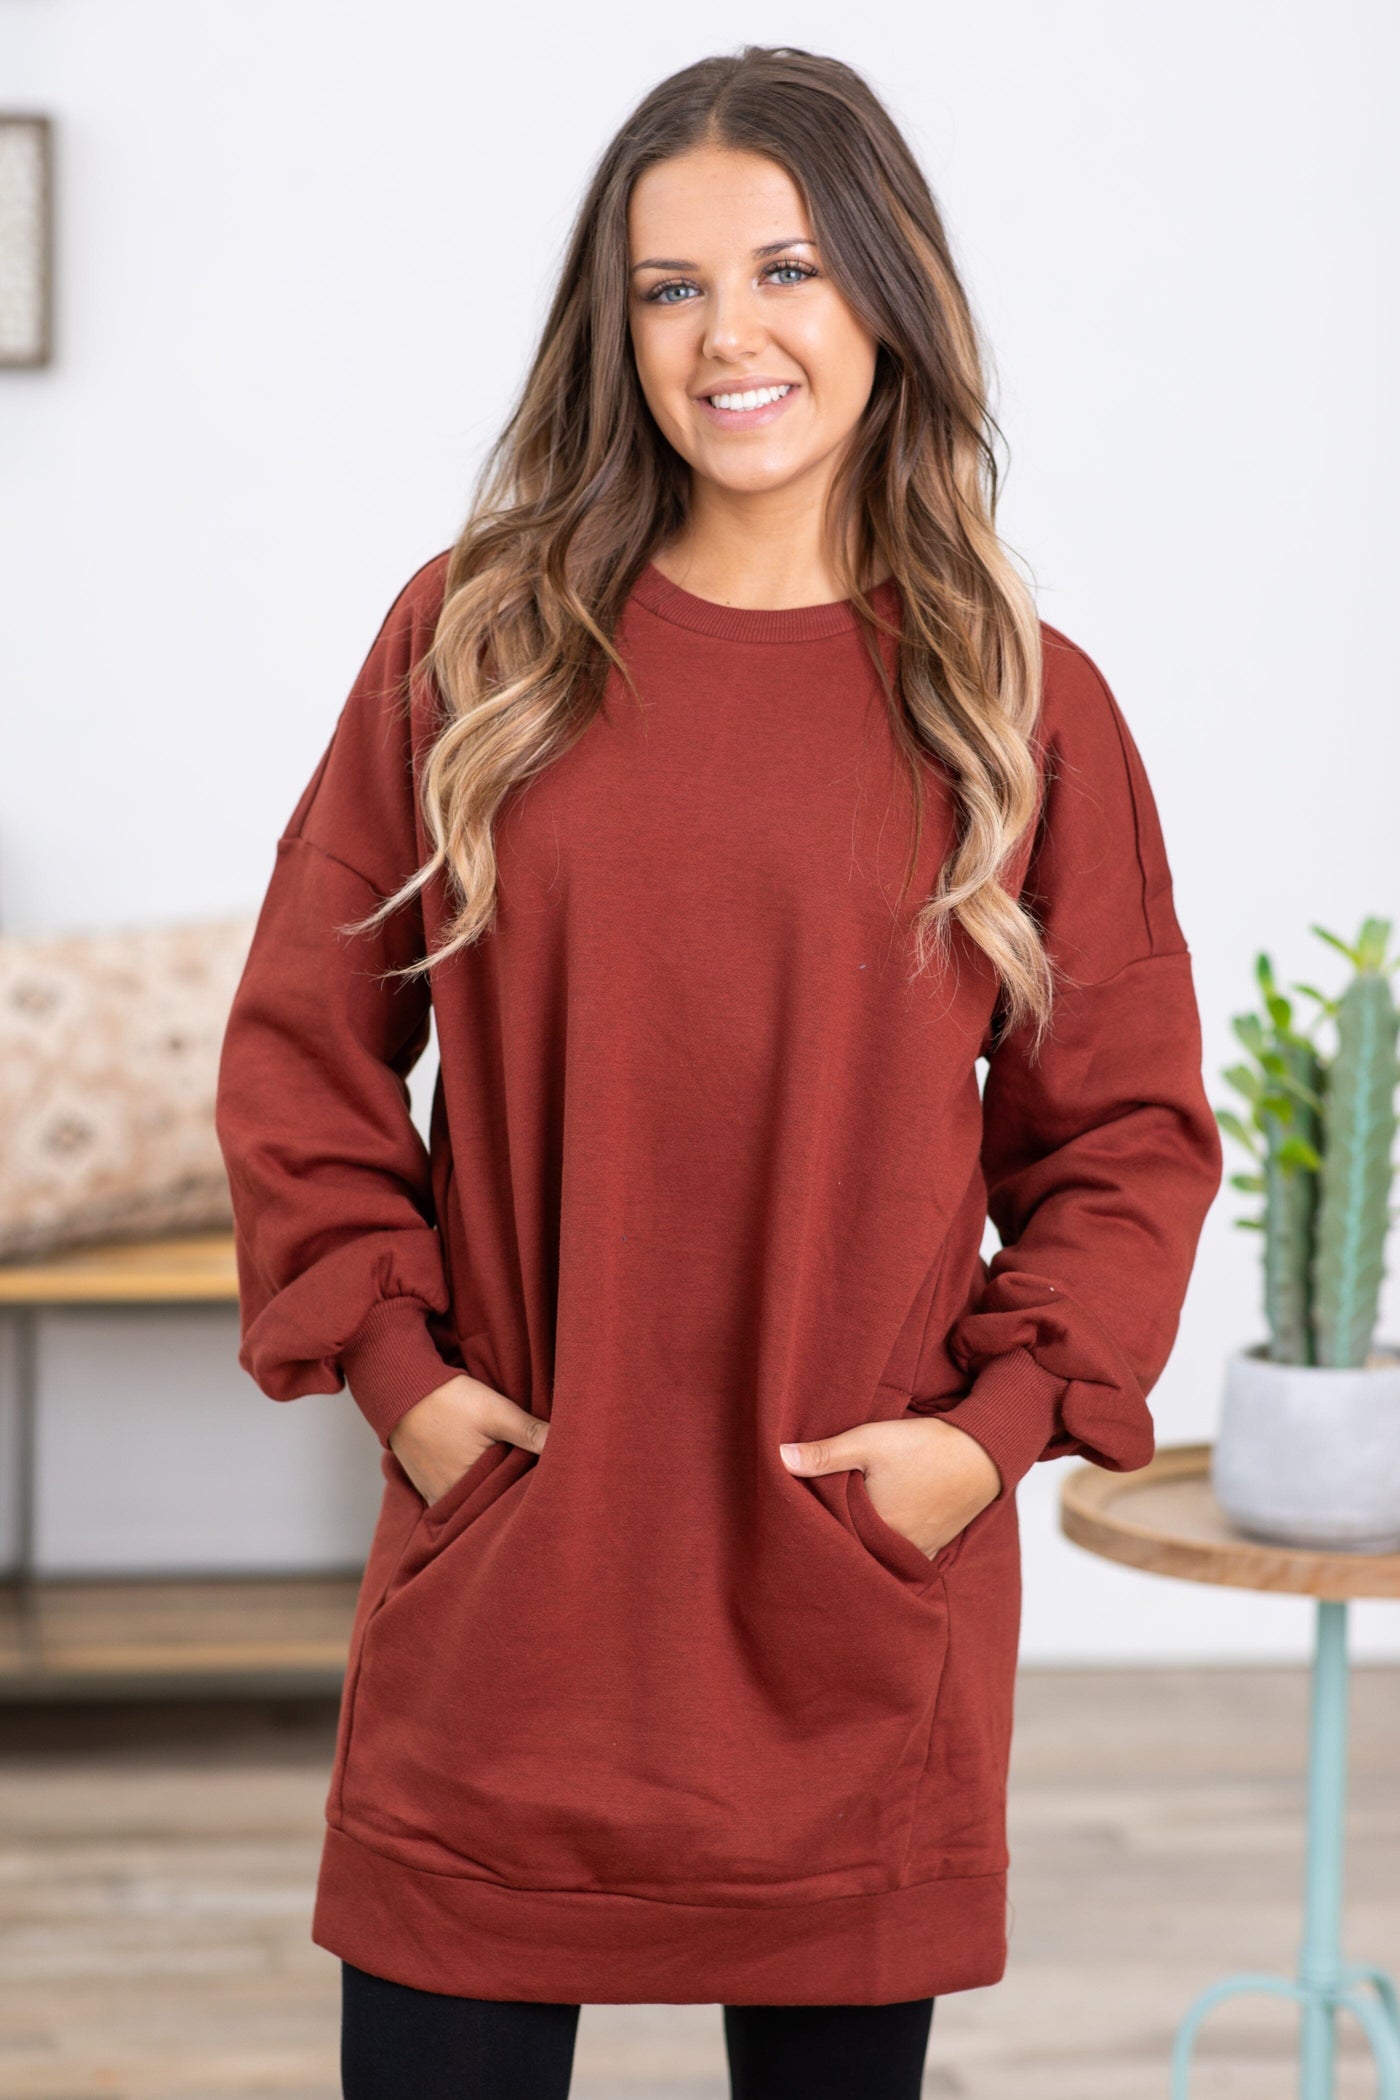 Rust Tunic Length Sweatshirt With Pockets - Filly Flair